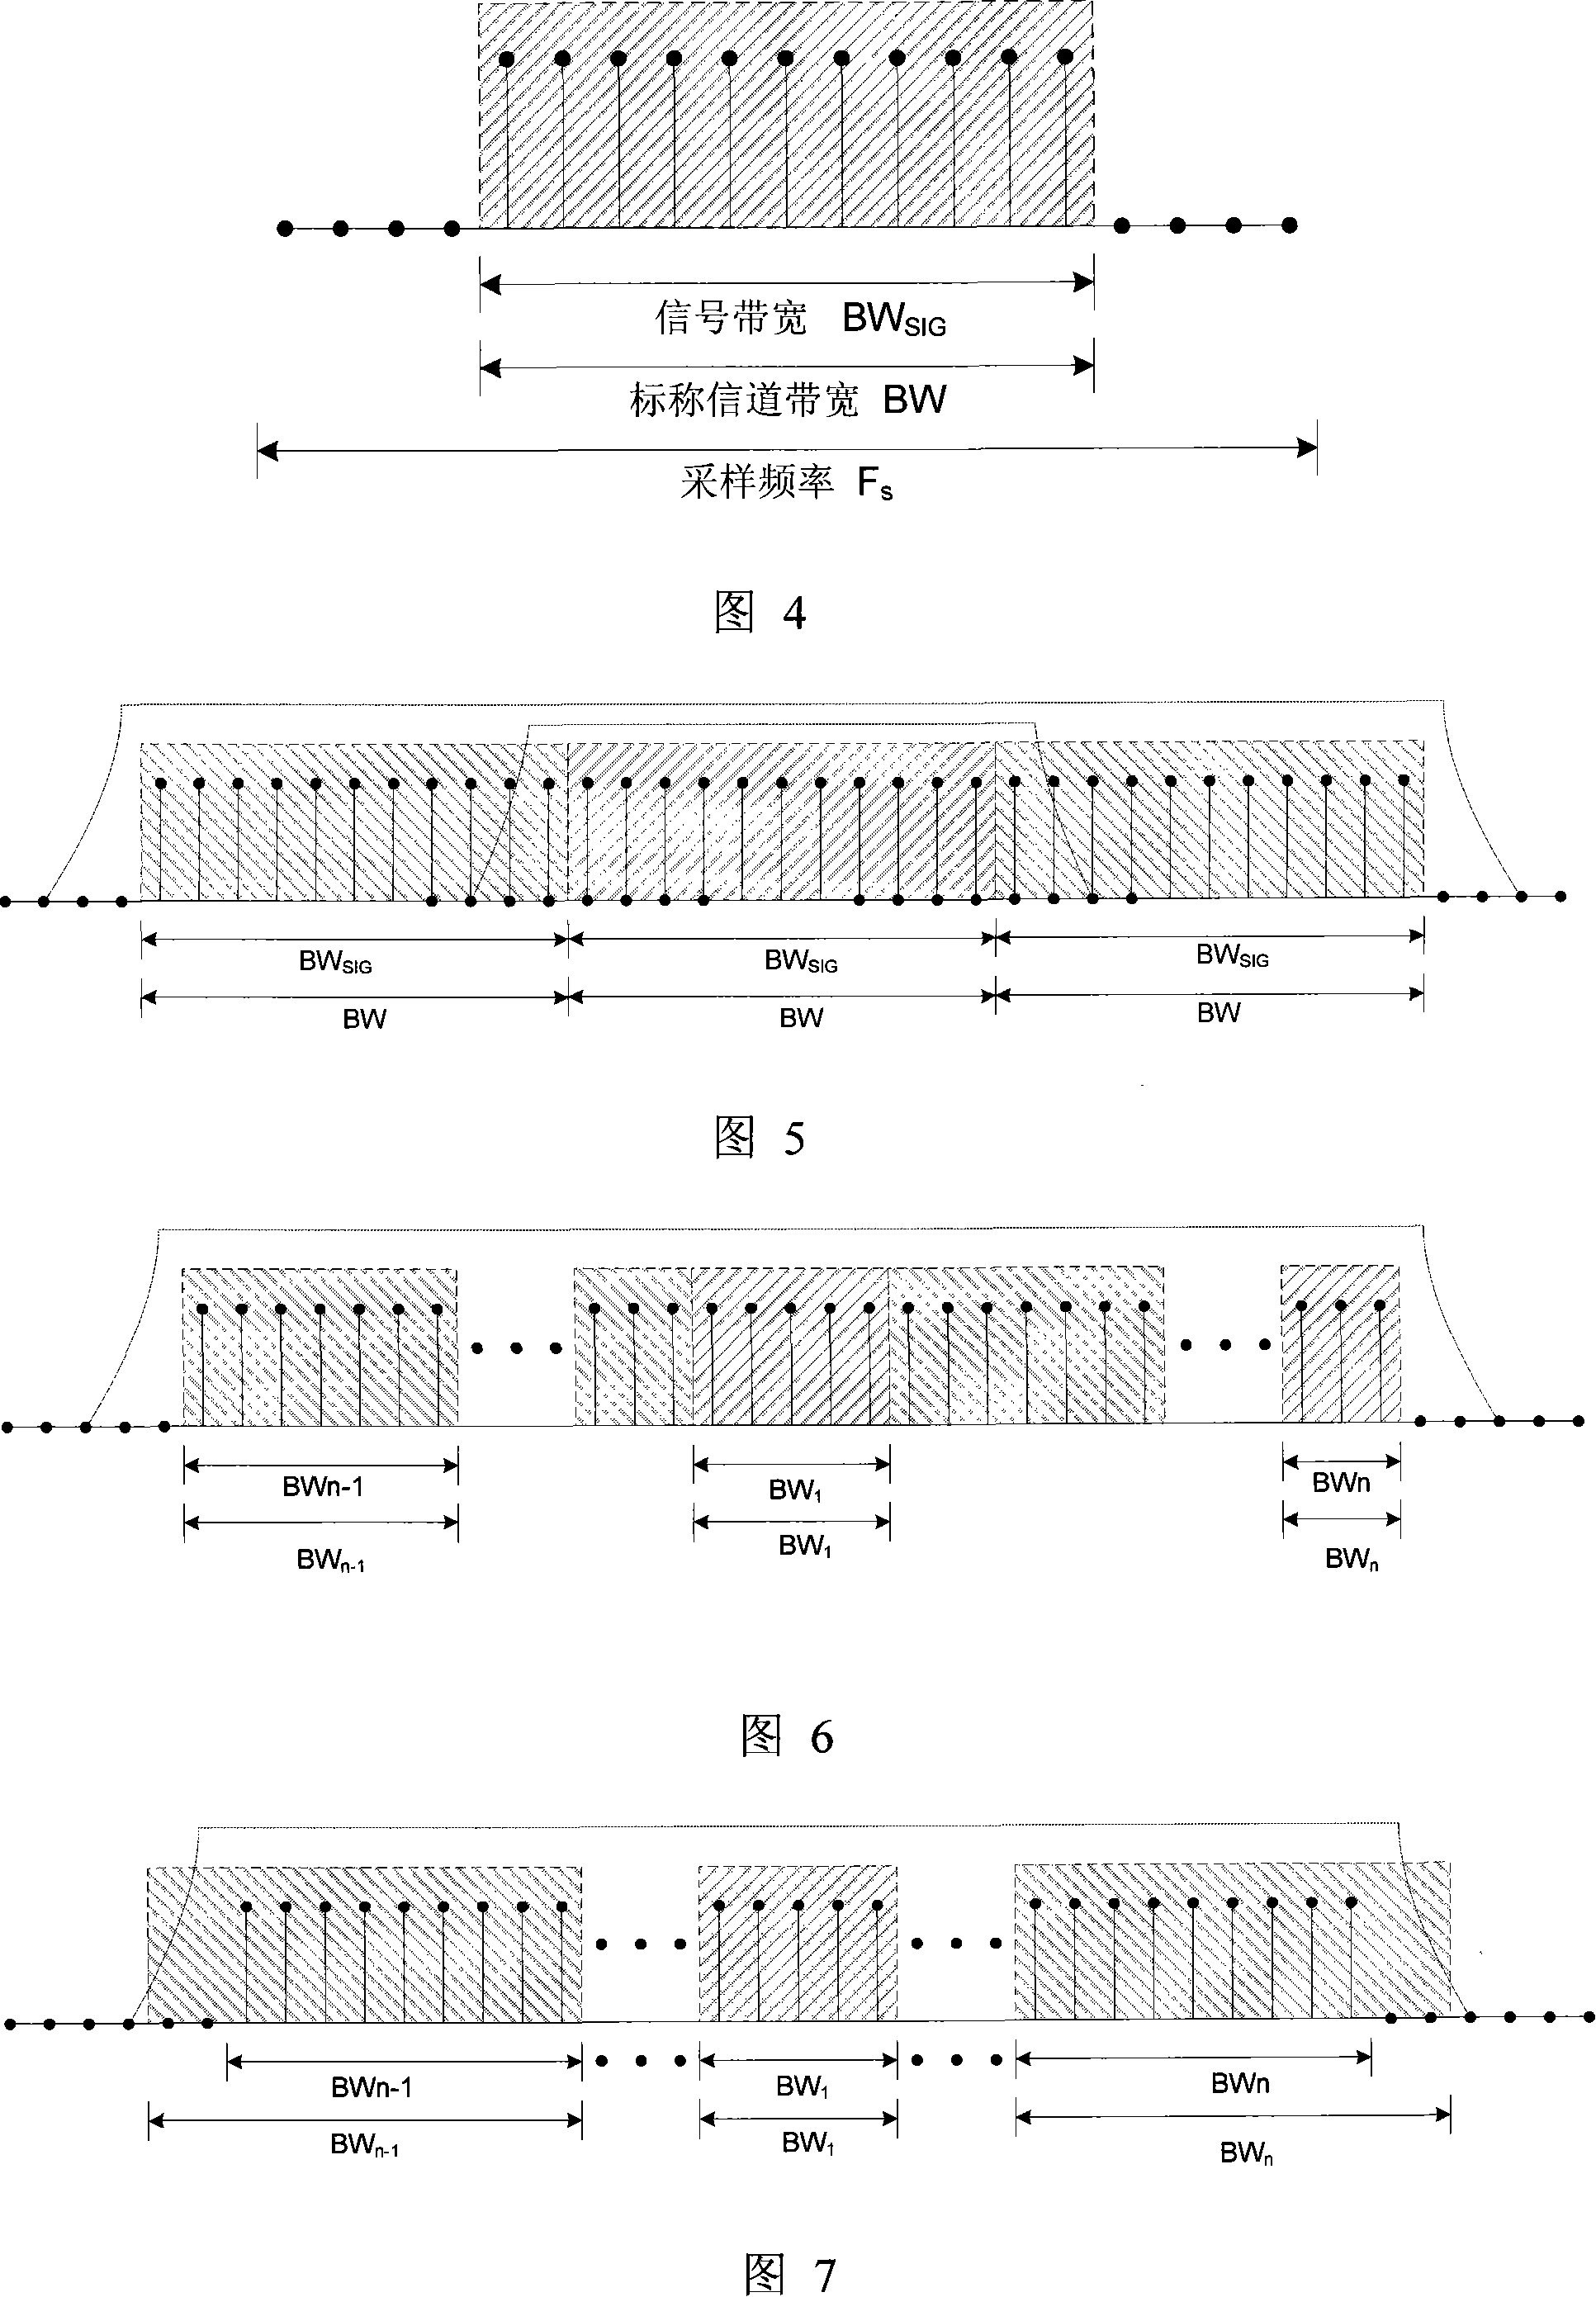 Extendable OFDM and ofdma bandwidth distributing method and system